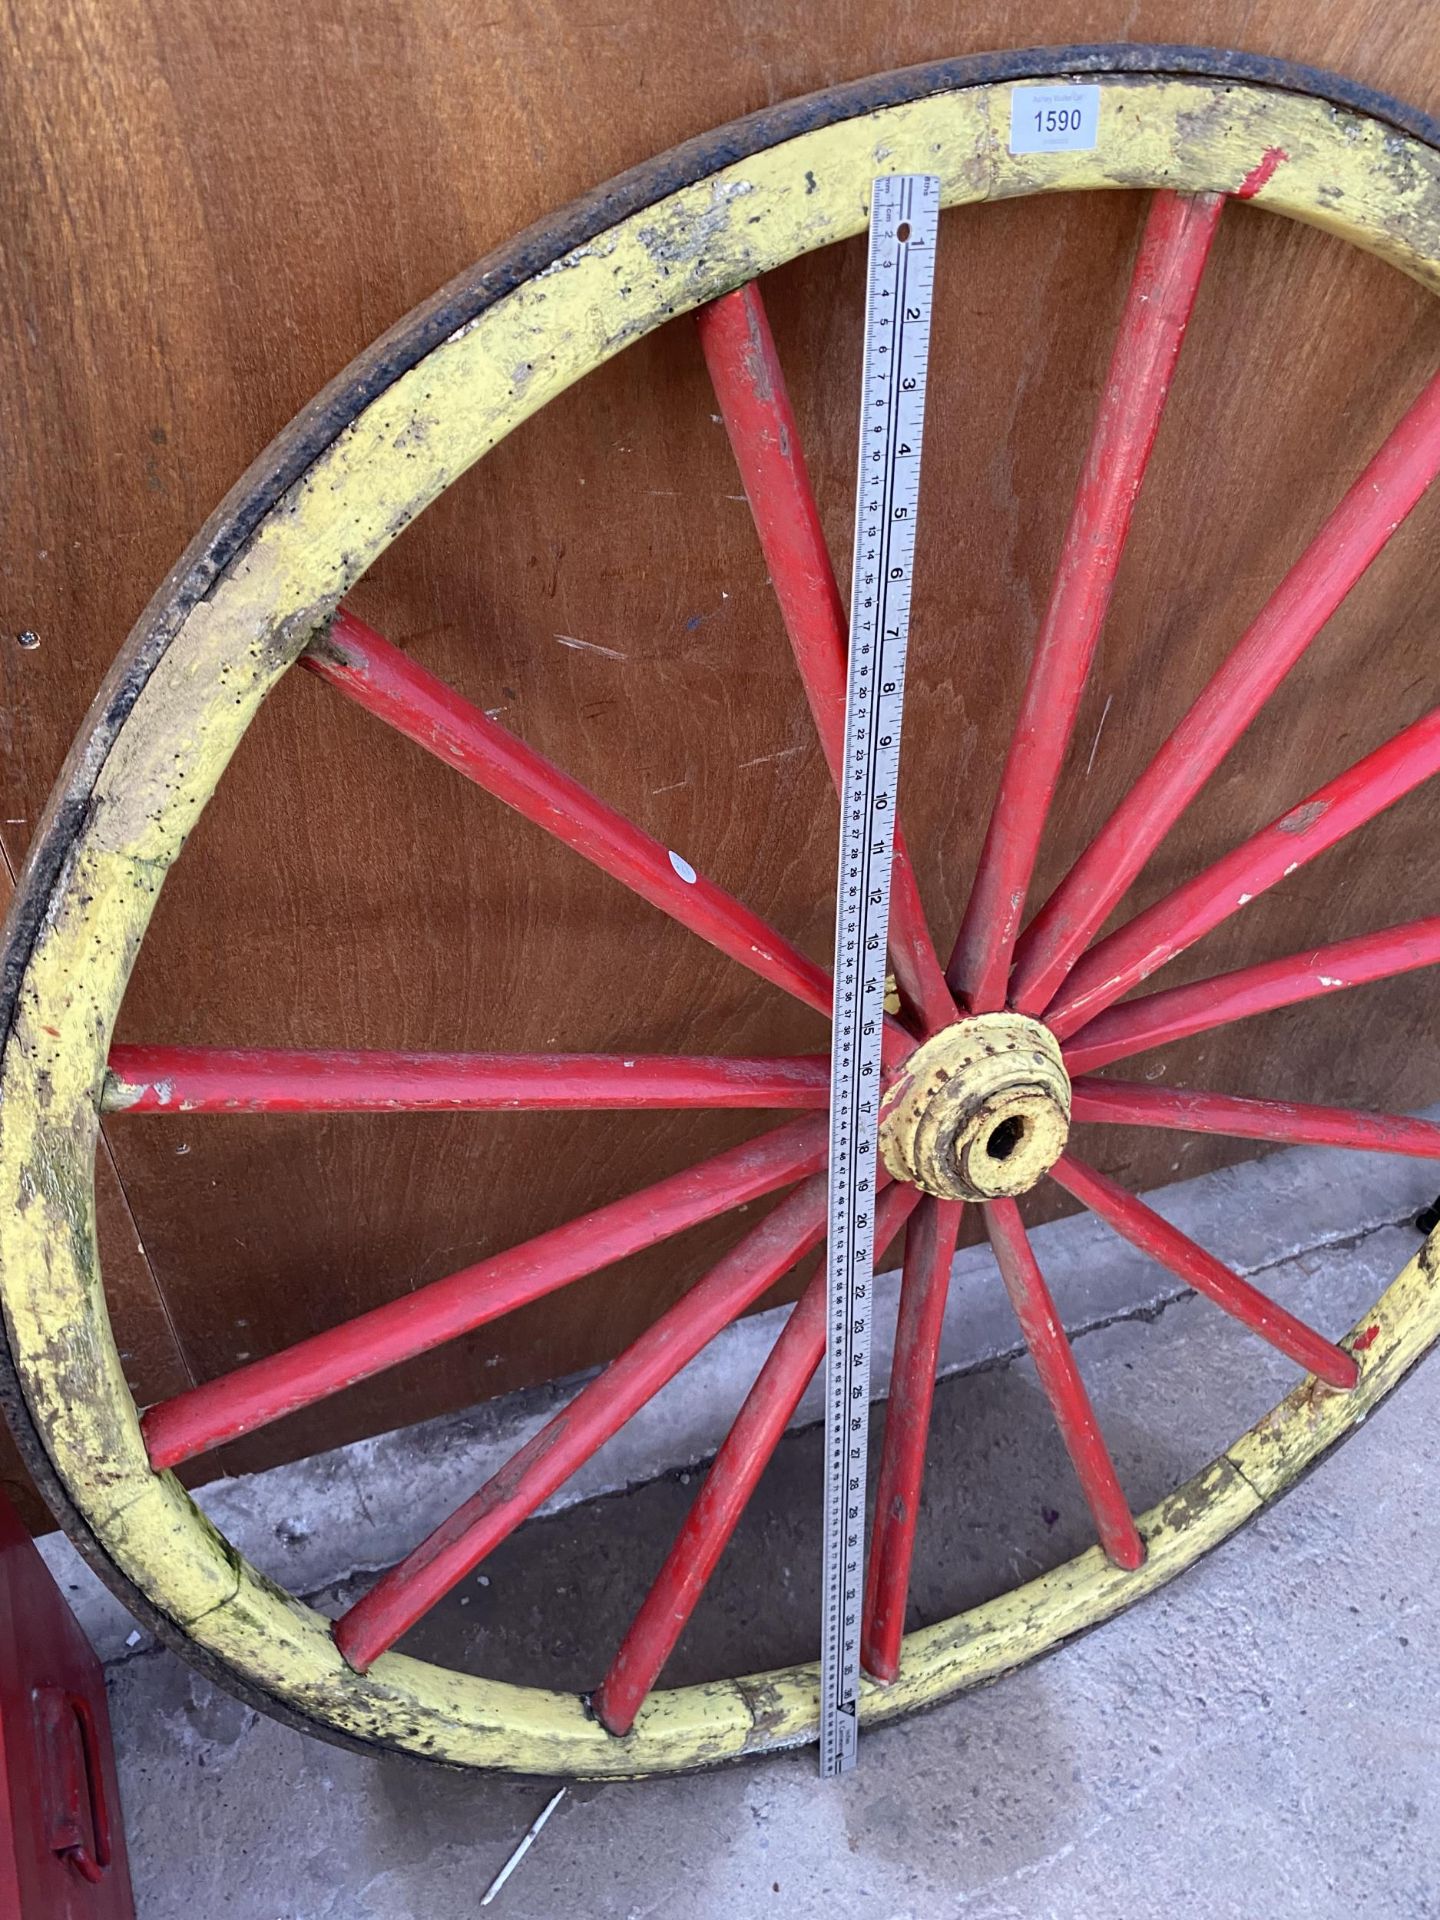 A WOODEN CART WHEEL WITH METAL BANDING - Image 3 of 3